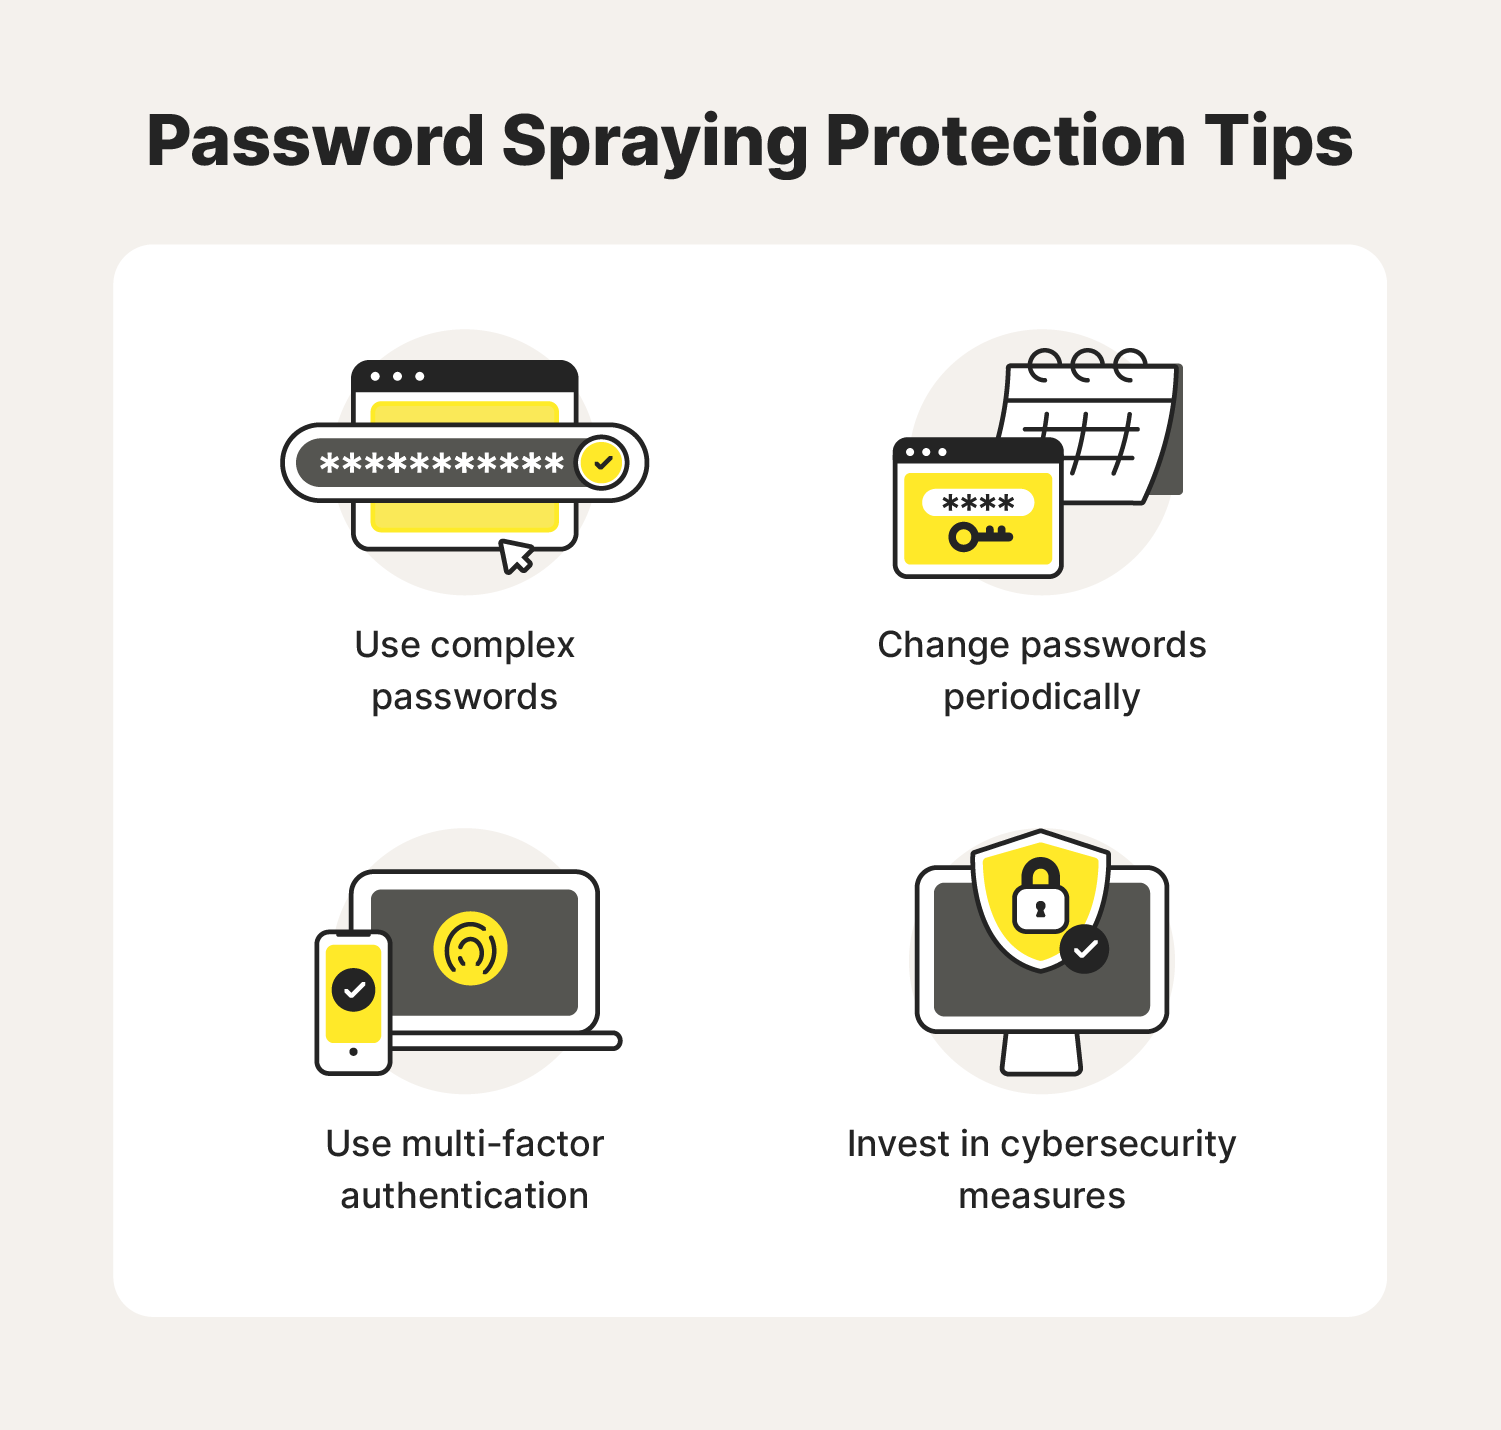 Four illustrations accompany password spraying protection tips to help keep devices safe.